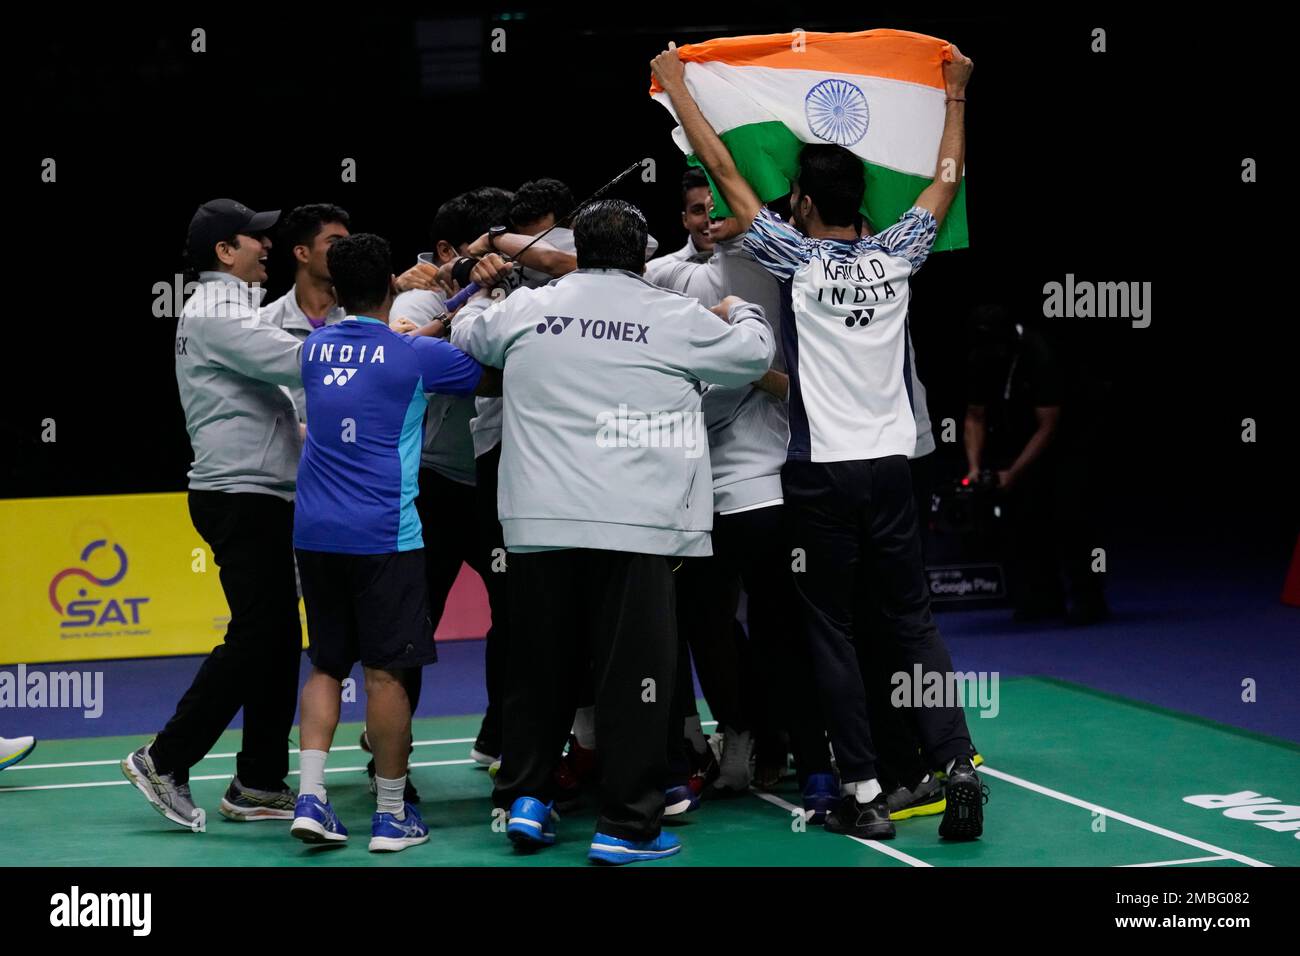 Indias team celebrate after win over Denmarks team during their mens single semi-final match at Thomas and Uber Cup in Bangkok, Thailand, Friday, May 13, 2022